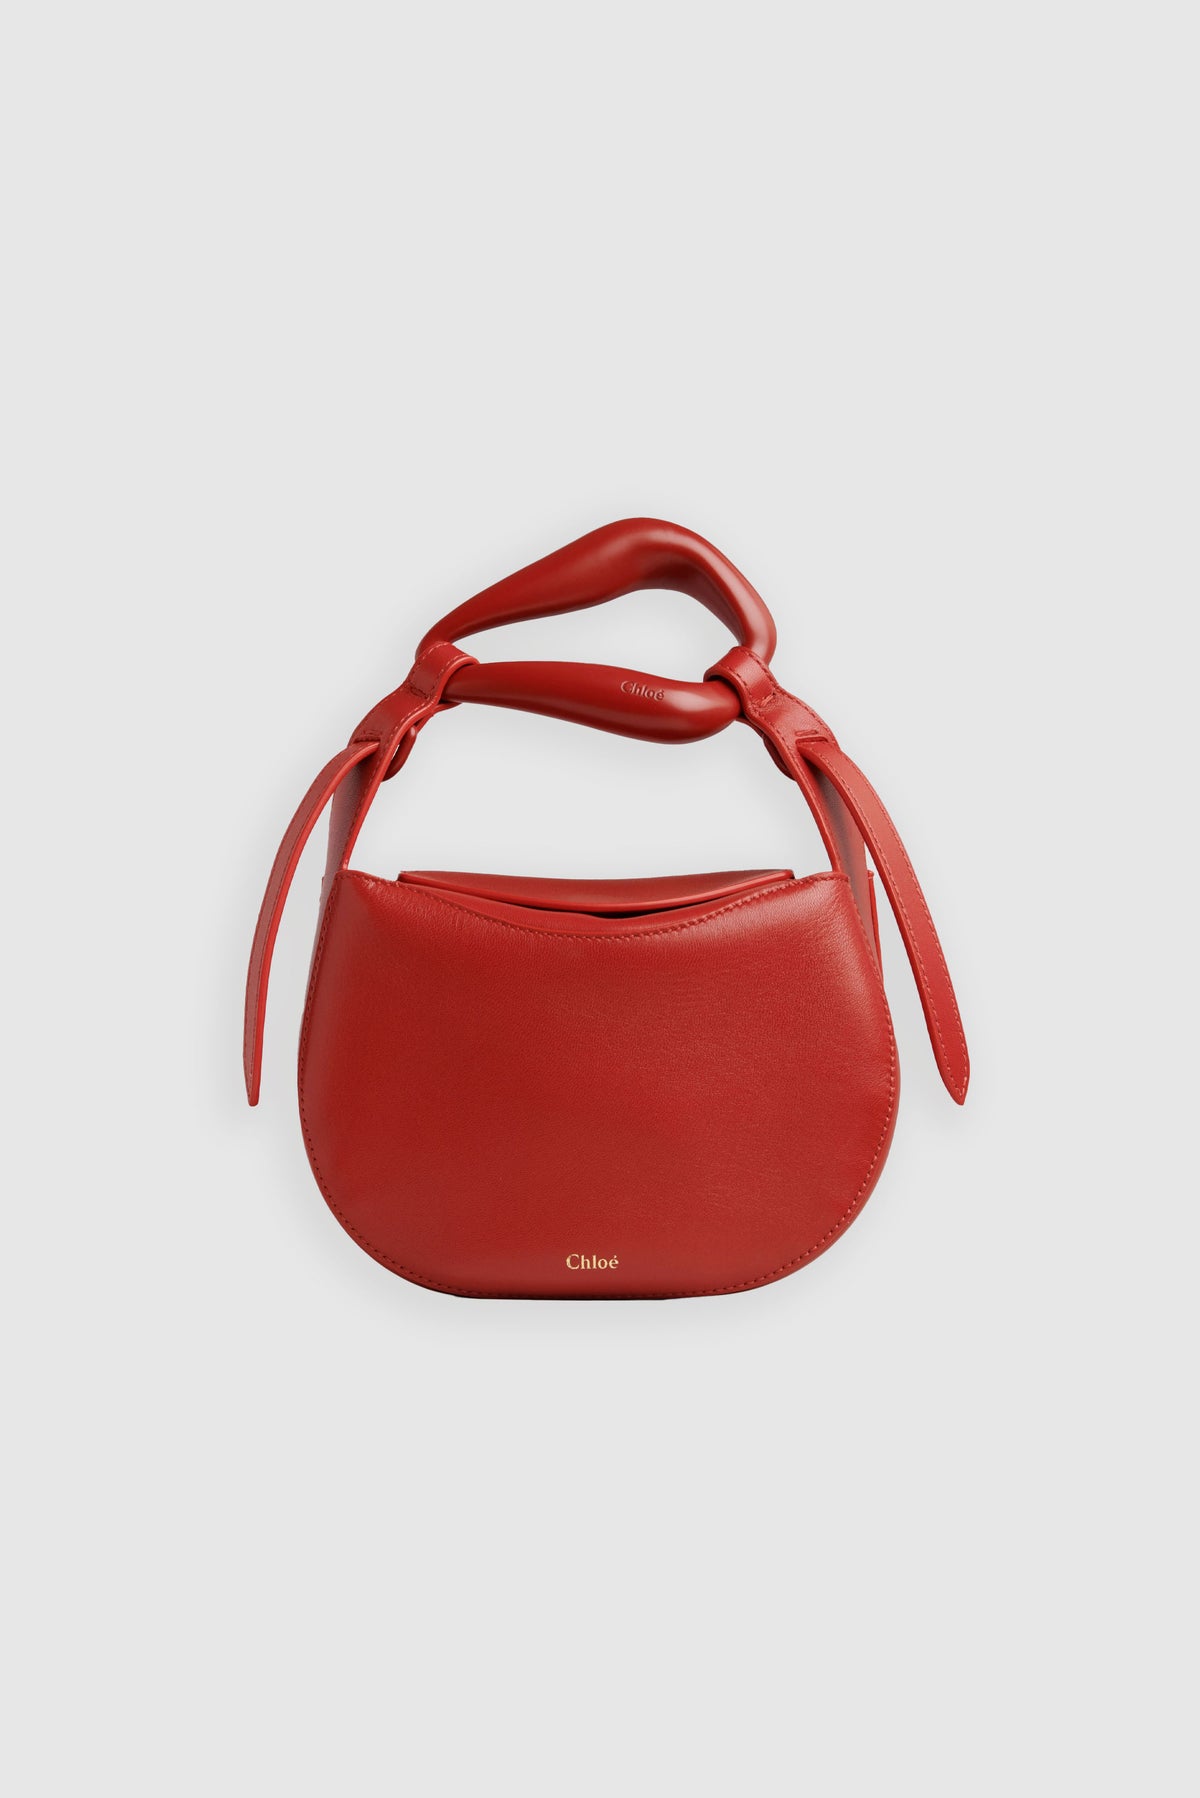 Chloé Red Leather Kiss Bag